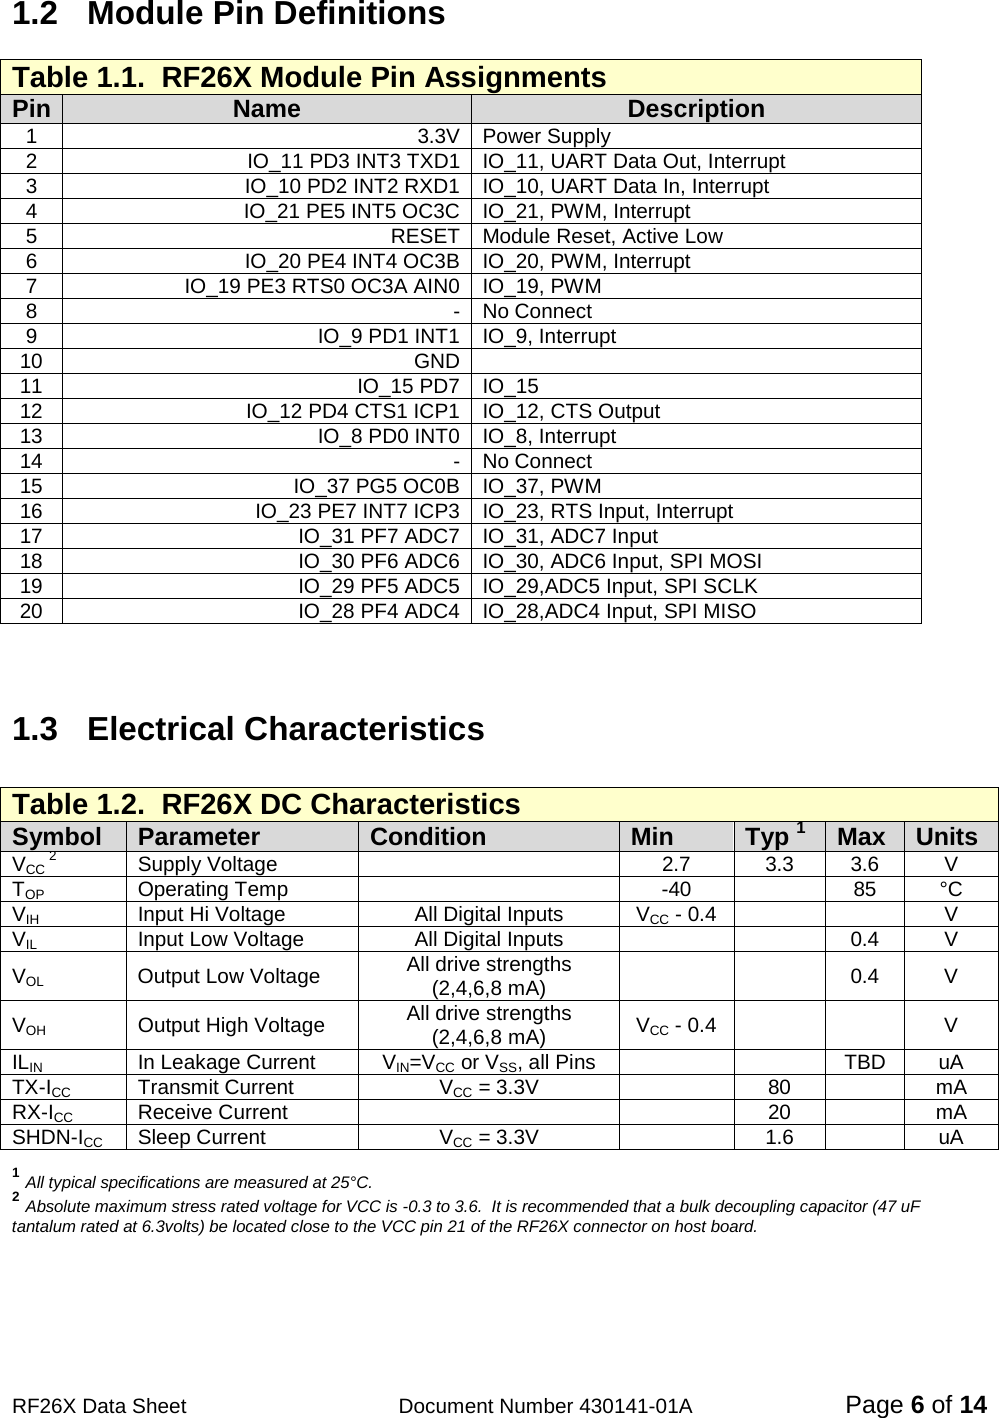                                            RF26X Data Sheet                  Document Number 430141-01A  Page 6 of 14 1.2  Module Pin Definitions Table 1.1.  RF26X Module Pin Assignments Pin Name Description 1 3.3V Power Supply 2 IO_11 PD3 INT3 TXD1 IO_11, UART Data Out, Interrupt 3 IO_10 PD2 INT2 RXD1 IO_10, UART Data In, Interrupt 4 IO_21 PE5 INT5 OC3C IO_21, PWM, Interrupt 5 RESET Module Reset, Active Low 6 IO_20 PE4 INT4 OC3B IO_20, PWM, Interrupt 7 IO_19 PE3 RTS0 OC3A AIN0 IO_19, PWM 8 - No Connect 9 IO_9 PD1 INT1 IO_9, Interrupt 10 GND  11 IO_15 PD7 IO_15 12 IO_12 PD4 CTS1 ICP1 IO_12, CTS Output 13 IO_8 PD0 INT0 IO_8, Interrupt 14 - No Connect 15 IO_37 PG5 OC0B IO_37, PWM 16 IO_23 PE7 INT7 ICP3 IO_23, RTS Input, Interrupt 17 IO_31 PF7 ADC7 IO_31, ADC7 Input 18 IO_30 PF6 ADC6 IO_30, ADC6 Input, SPI MOSI 19 IO_29 PF5 ADC5 IO_29,ADC5 Input, SPI SCLK 20 IO_28 PF4 ADC4 IO_28,ADC4 Input, SPI MISO   1.3  Electrical Characteristics  Table 1.2.  RF26X DC Characteristics Symbol Parameter Condition Min Typ 1 Max Units VCC 2 Supply Voltage  2.7 3.3 3.6 V TOP Operating Temp   -40  85 °C VIH Input Hi Voltage All Digital Inputs VCC - 0.4   V VIL Input Low Voltage All Digital Inputs   0.4 V VOL Output Low Voltage All drive strengths (2,4,6,8 mA)   0.4  V VOH Output High Voltage All drive strengths (2,4,6,8 mA) VCC - 0.4      V ILIN In Leakage Current VIN=VCC or VSS, all Pins   TBD uA TX-ICC  Transmit Current VCC = 3.3V  80  mA RX-ICC  Receive Current   20  mA SHDN-ICC Sleep Current  VCC = 3.3V  1.6  uA  1  All typical specifications are measured at 25°C. 2  Absolute maximum stress rated voltage for VCC is -0.3 to 3.6.  It is recommended that a bulk decoupling capacitor (47 uF tantalum rated at 6.3volts) be located close to the VCC pin 21 of the RF26X connector on host board.     